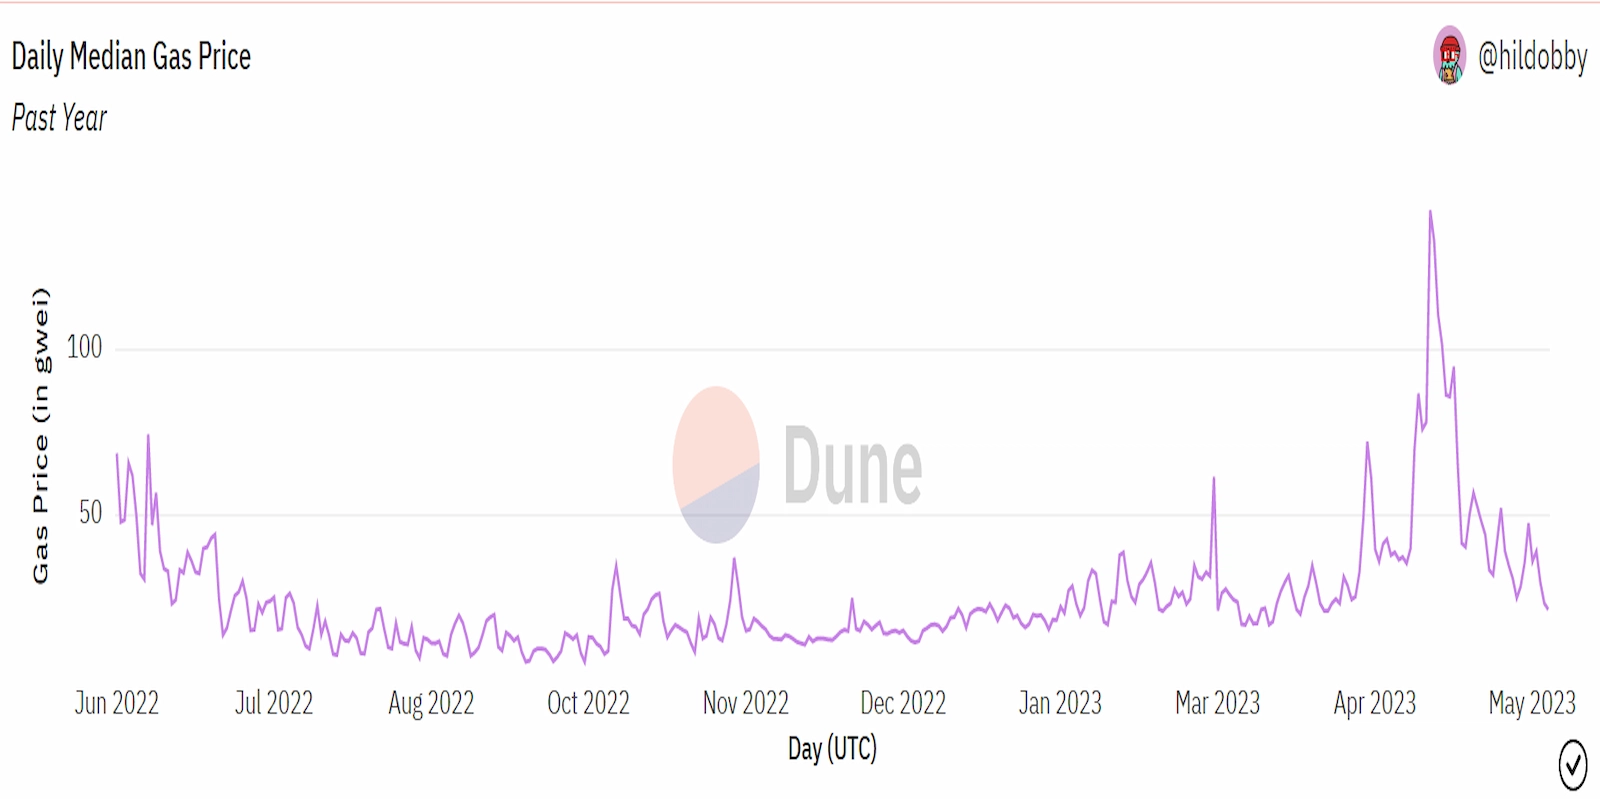 Gas fees on the Ethereum network reached their highest level over the past 12 months in May 2023.